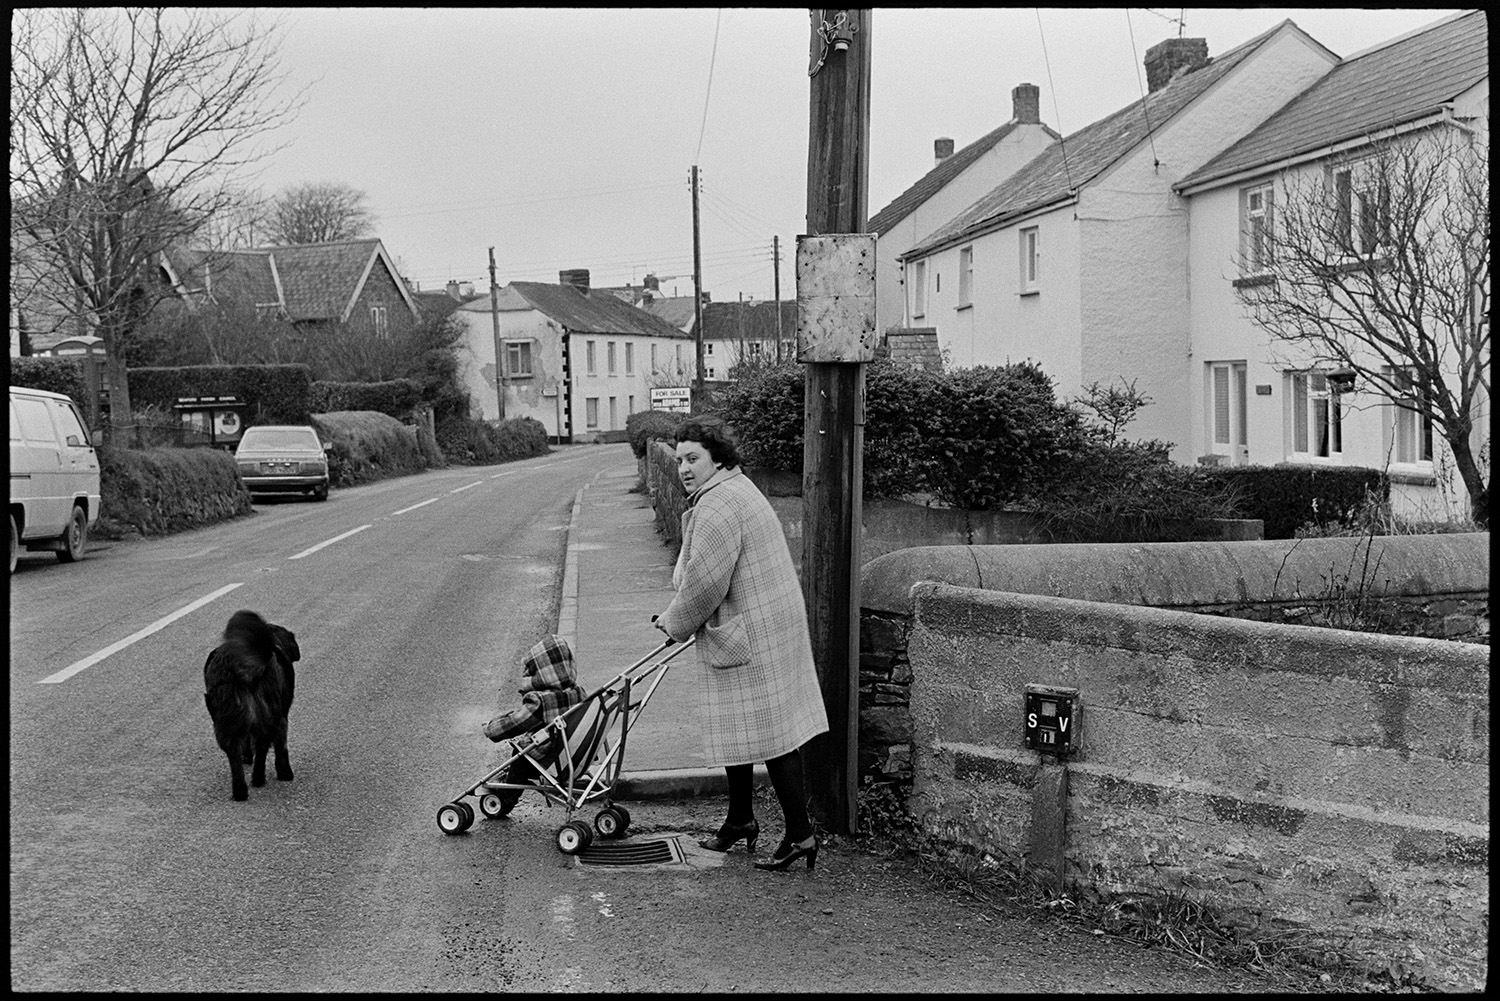 Farmer, milkman doing last milk round, showing new man the ropes, milk bottles.
[A woman wearing a winter coat pushing a child in a pushchair along a street in Beaford. A dog is with them. Other houses and parked cars can be seen in the background.]